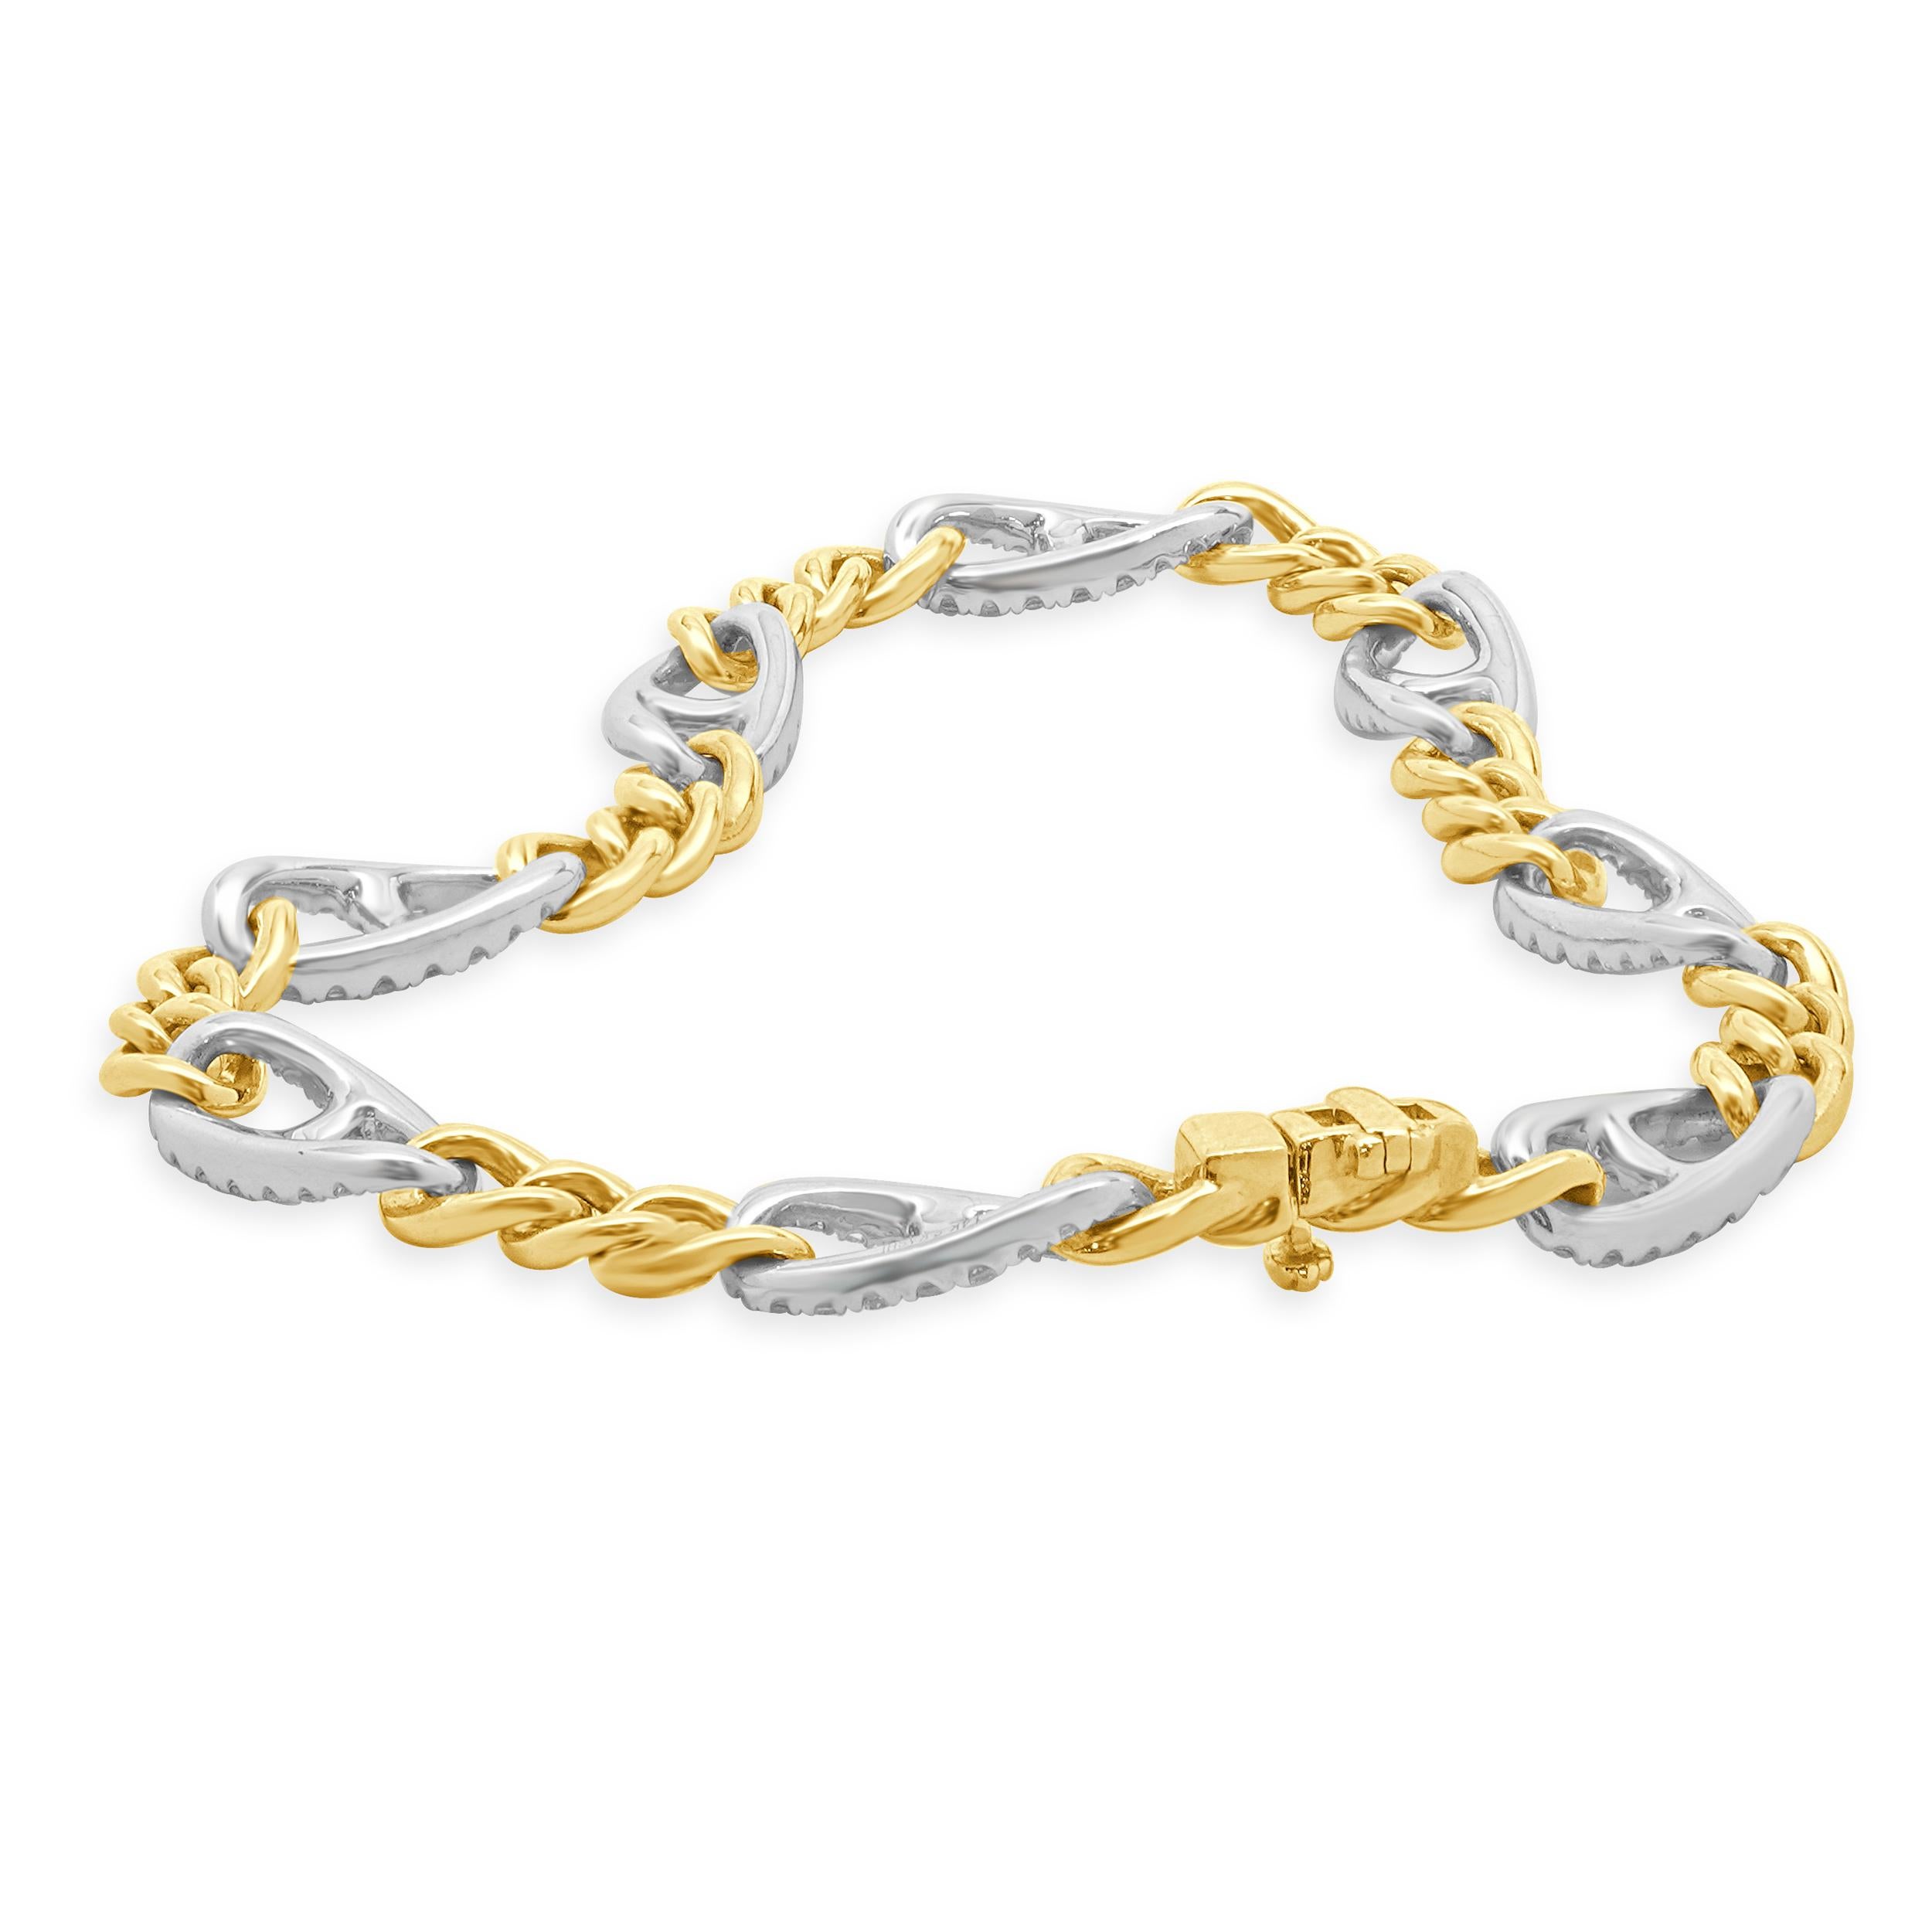 Designer: custom design
Material: 14K white & yellow Gold
Diamond: 160 round brilliant cut = 1.60cttw
Color: G
Clarity: SI1
Dimensions: bracelet will fit up to a 7-inch wrist
Weight: 13.08 grams
